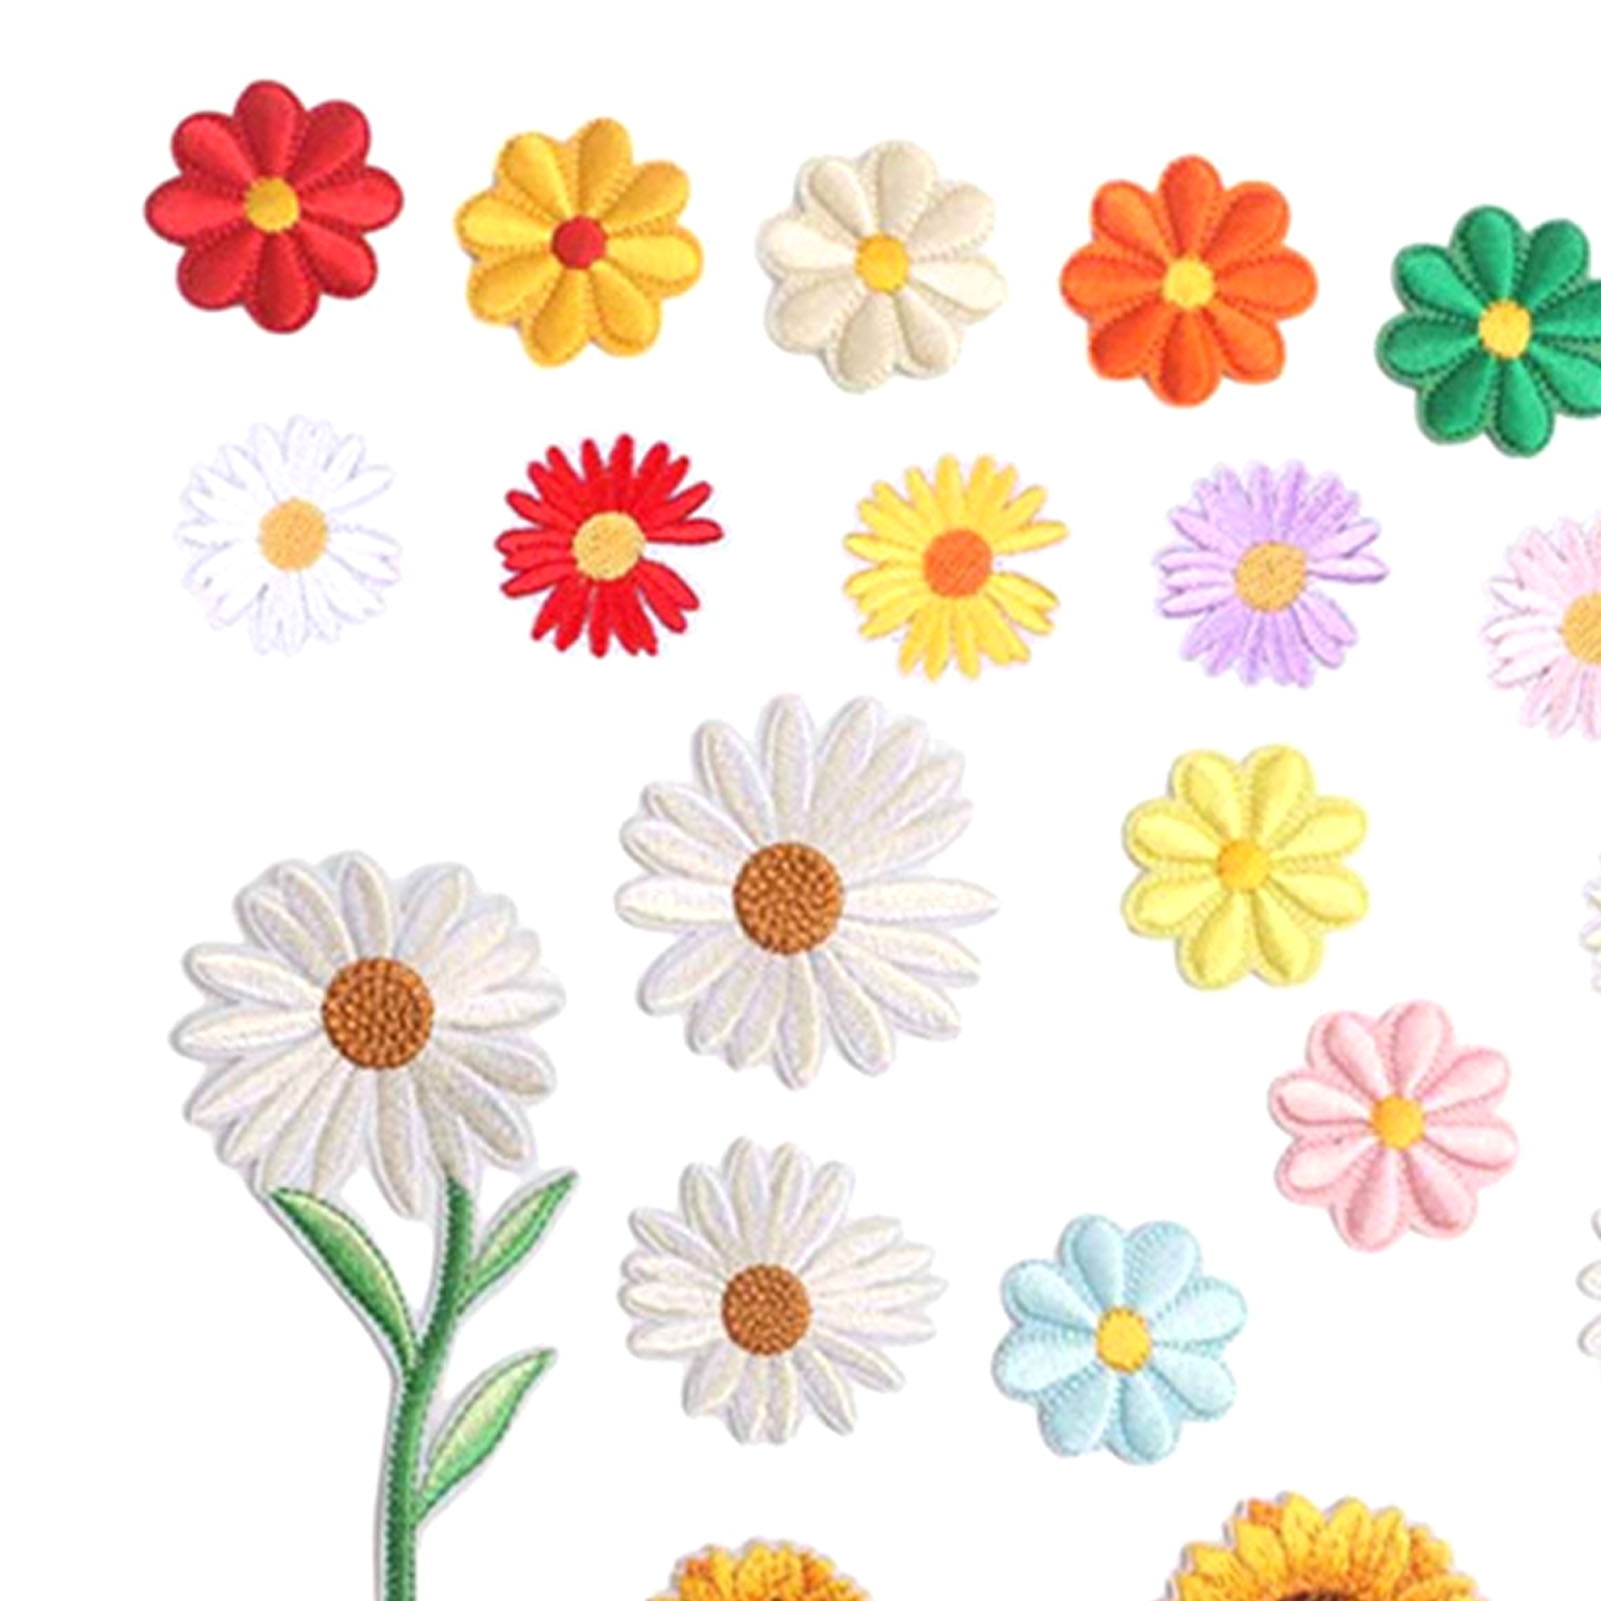 Cute Flower Daisy Iron Sew on Appliques Patches Embroidered Motif Floral DIY 